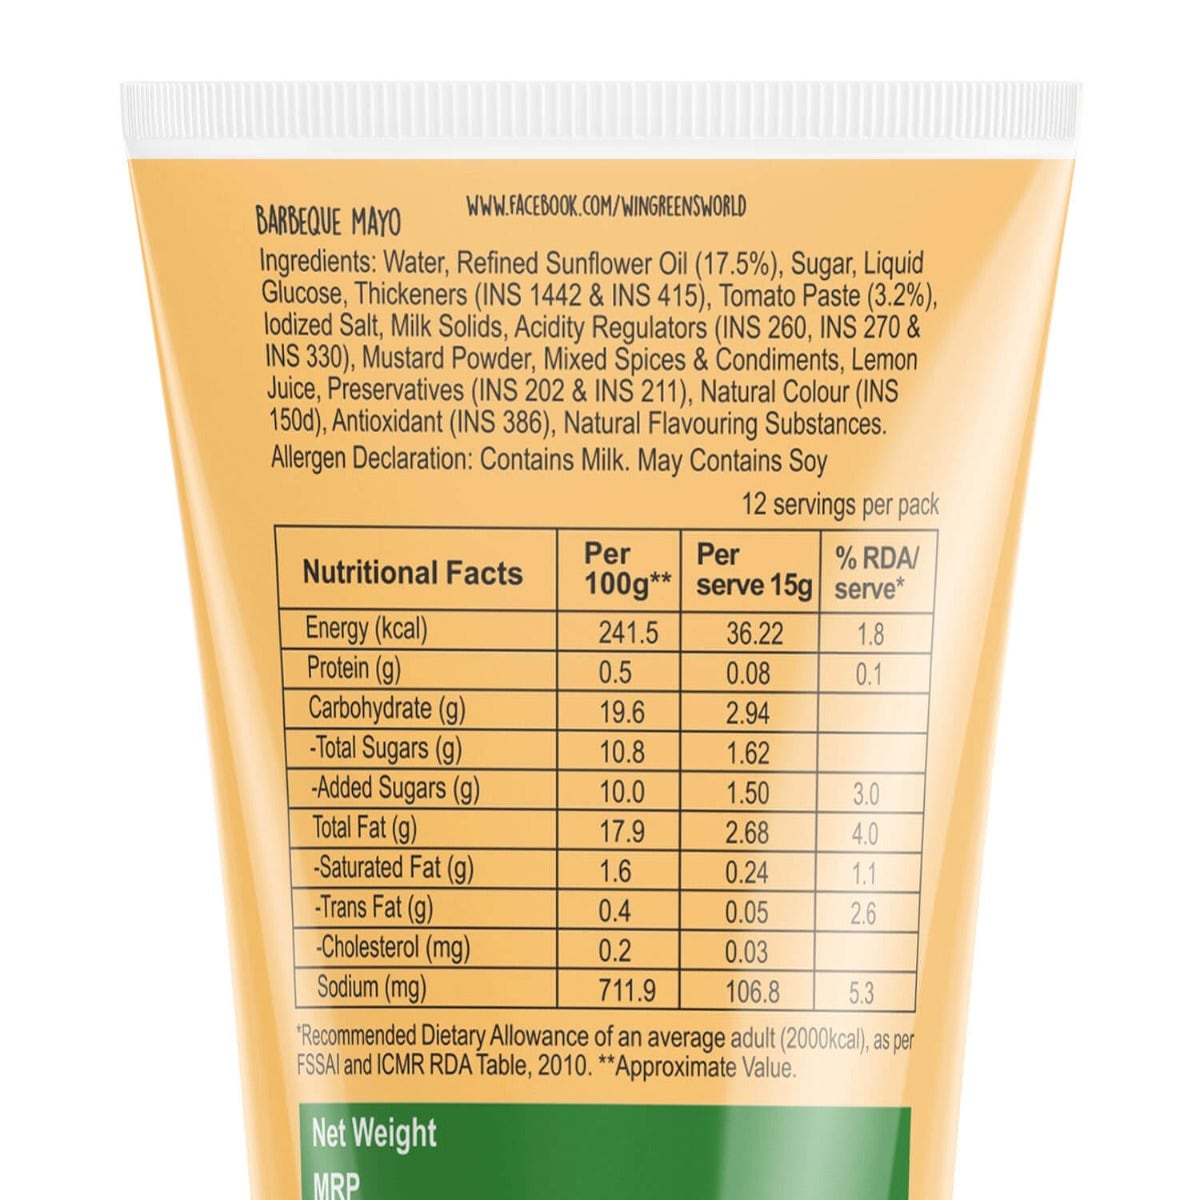 barbeque mayo nutrition facts